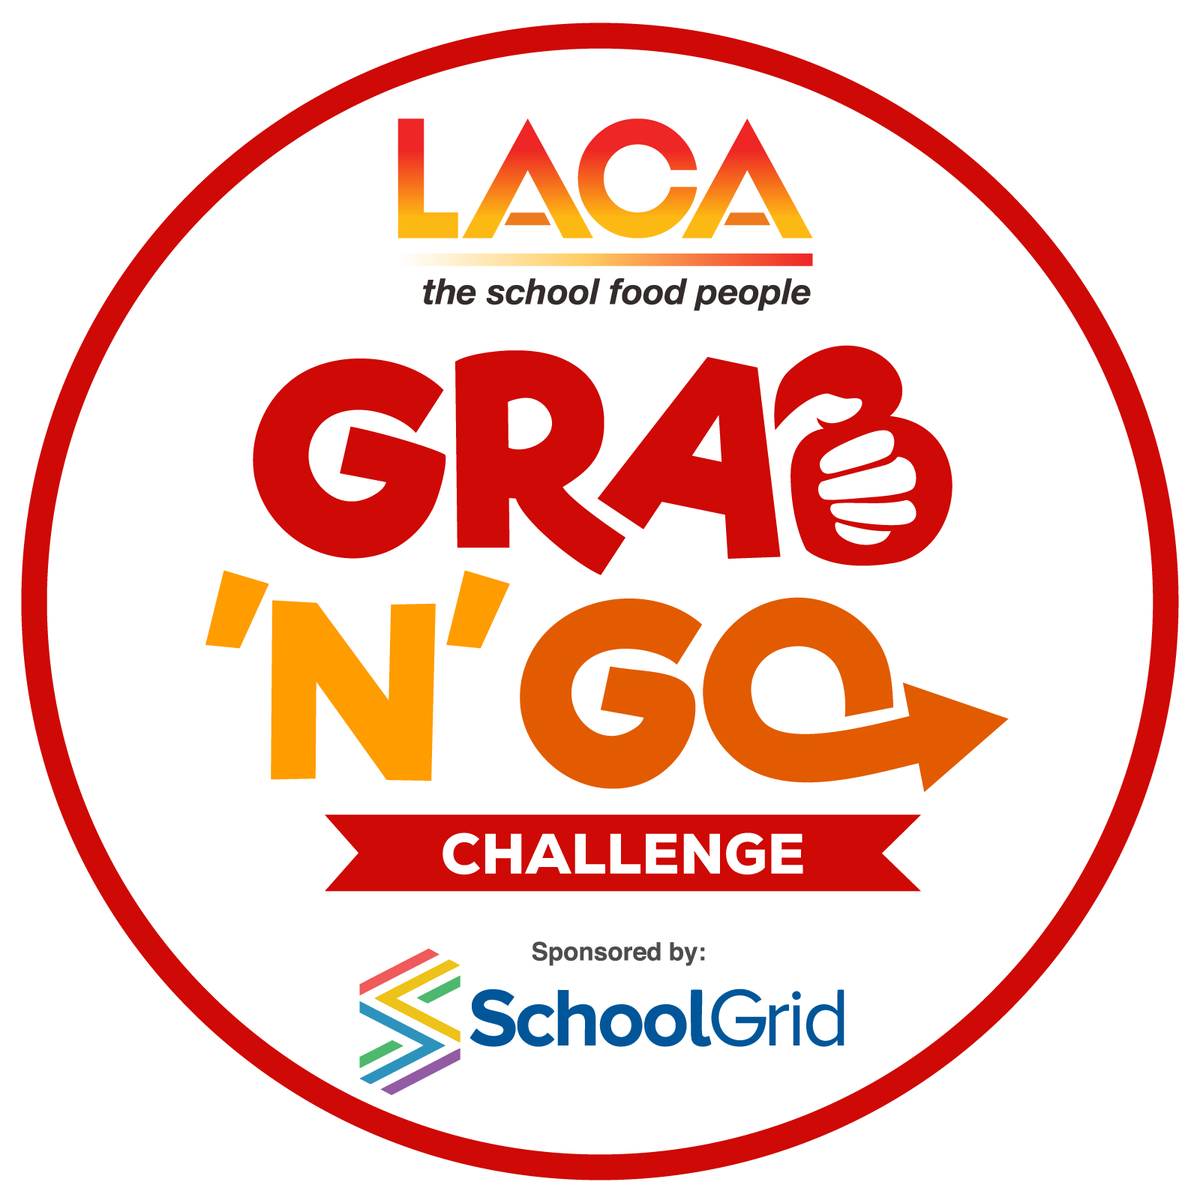 Are you a #schoolchef looking for the ultimate culinary challenge? Look no further! The Grab 'N' Go Challenge, sponsored by @SchoolGrid, is now open for registration. Don't miss your chance to show off your skills and compete against the best of the best. laca.co.uk/GrabandGo_Regi…